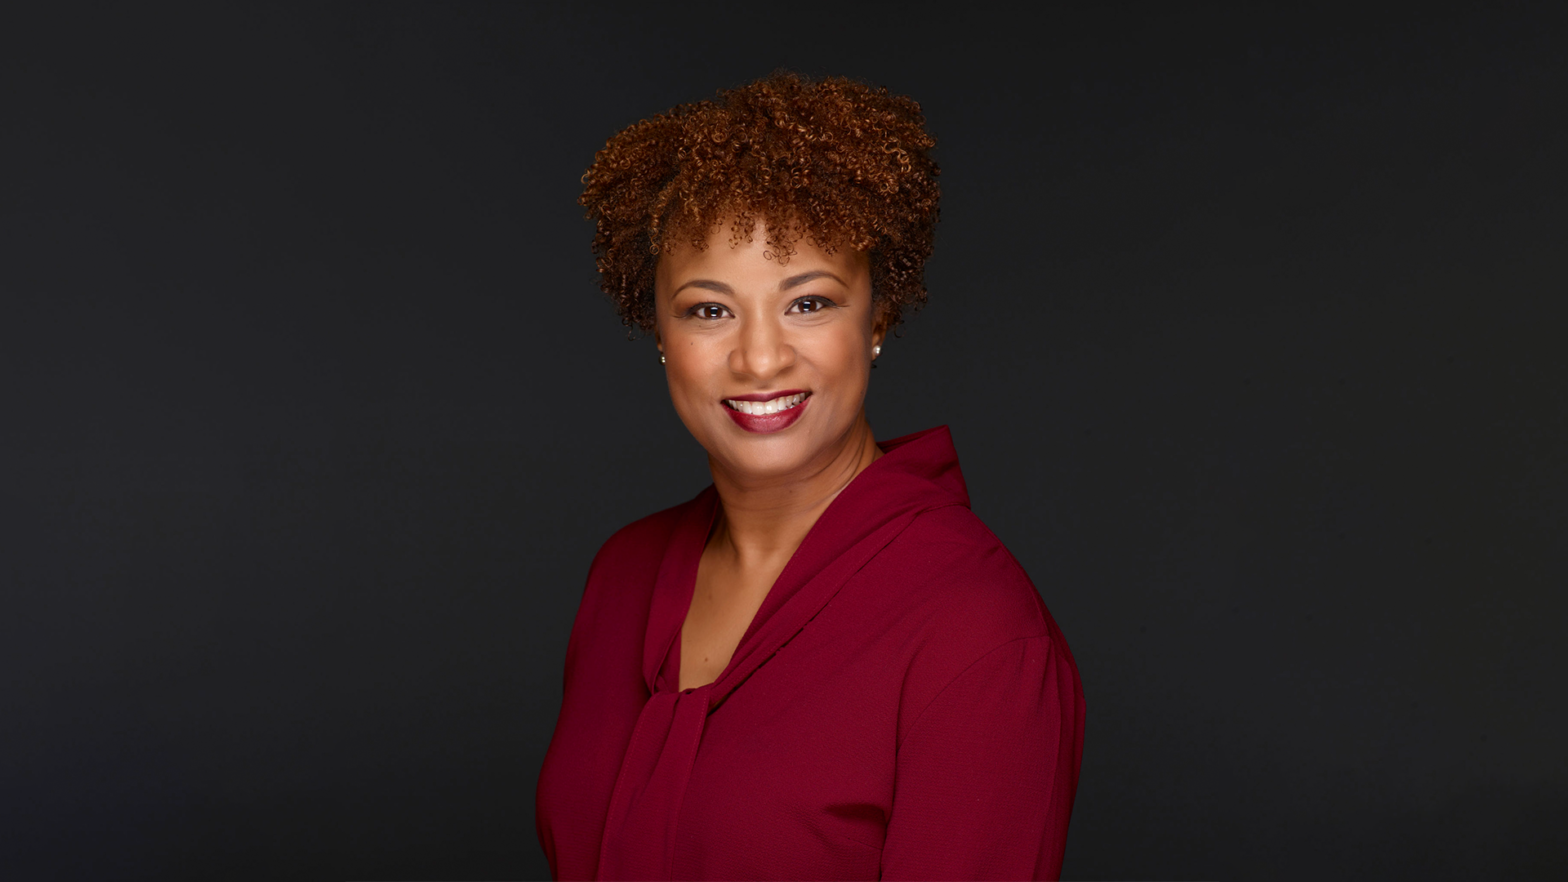 Karen Greenfield Plans To Bring More Inclusive Storytelling To National Geographic As Senior Vice President Of Content, Diversity And Inclusion